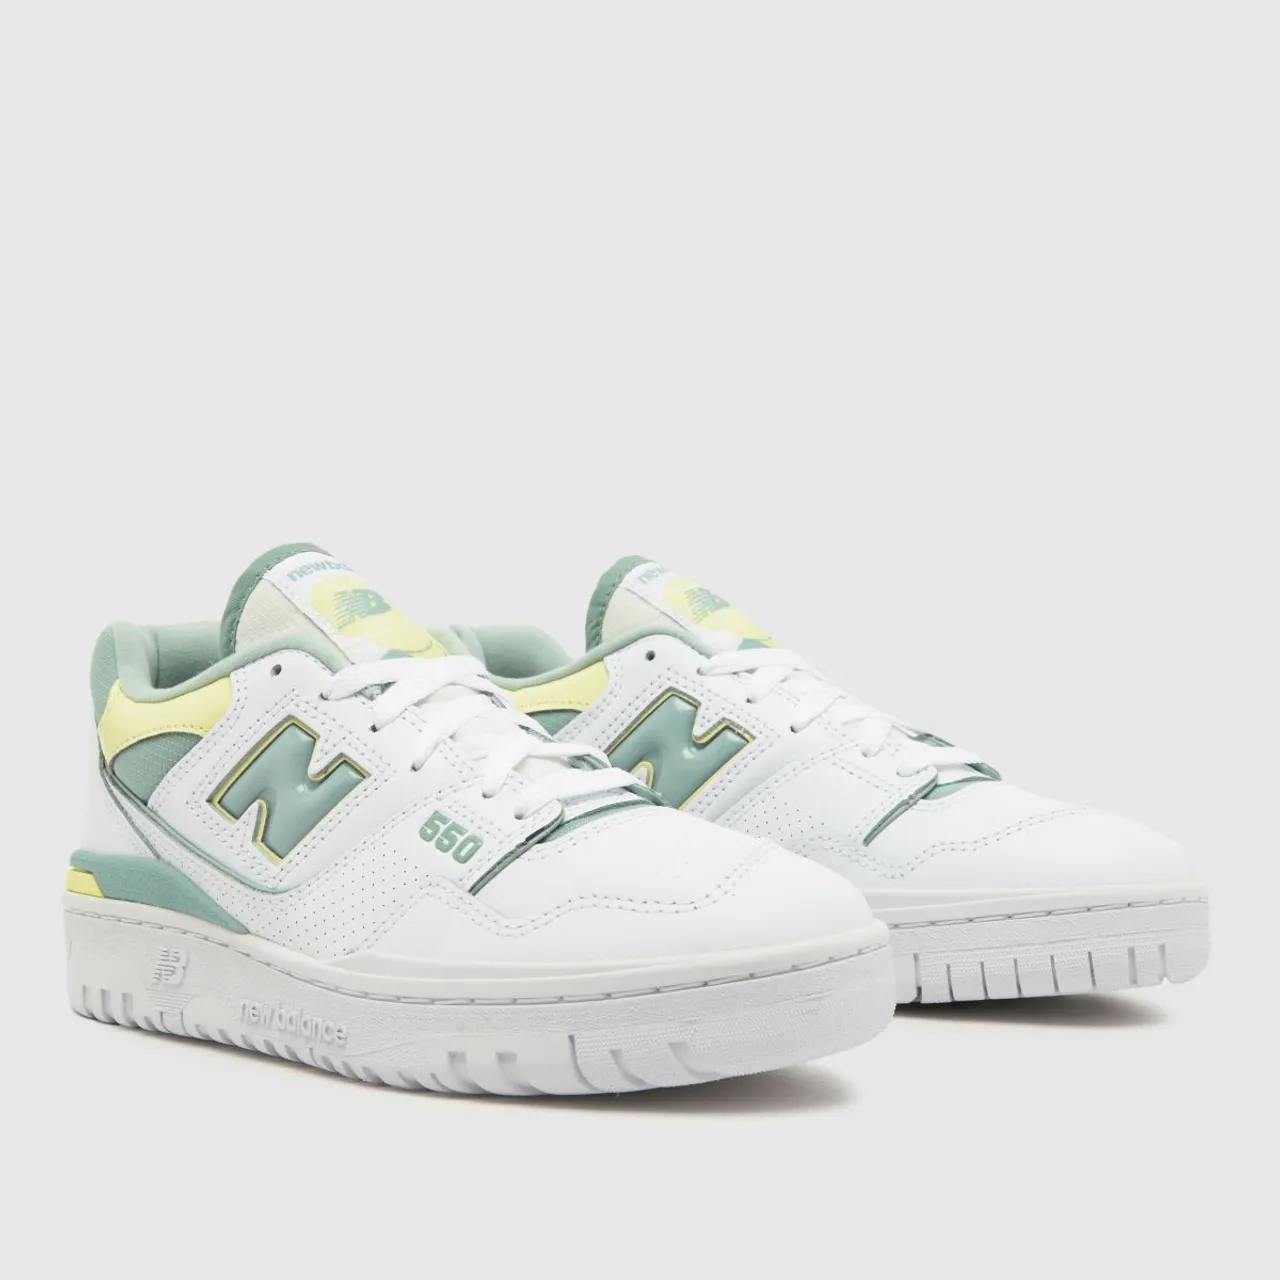 New Balance bb550 Trainers in White & Green